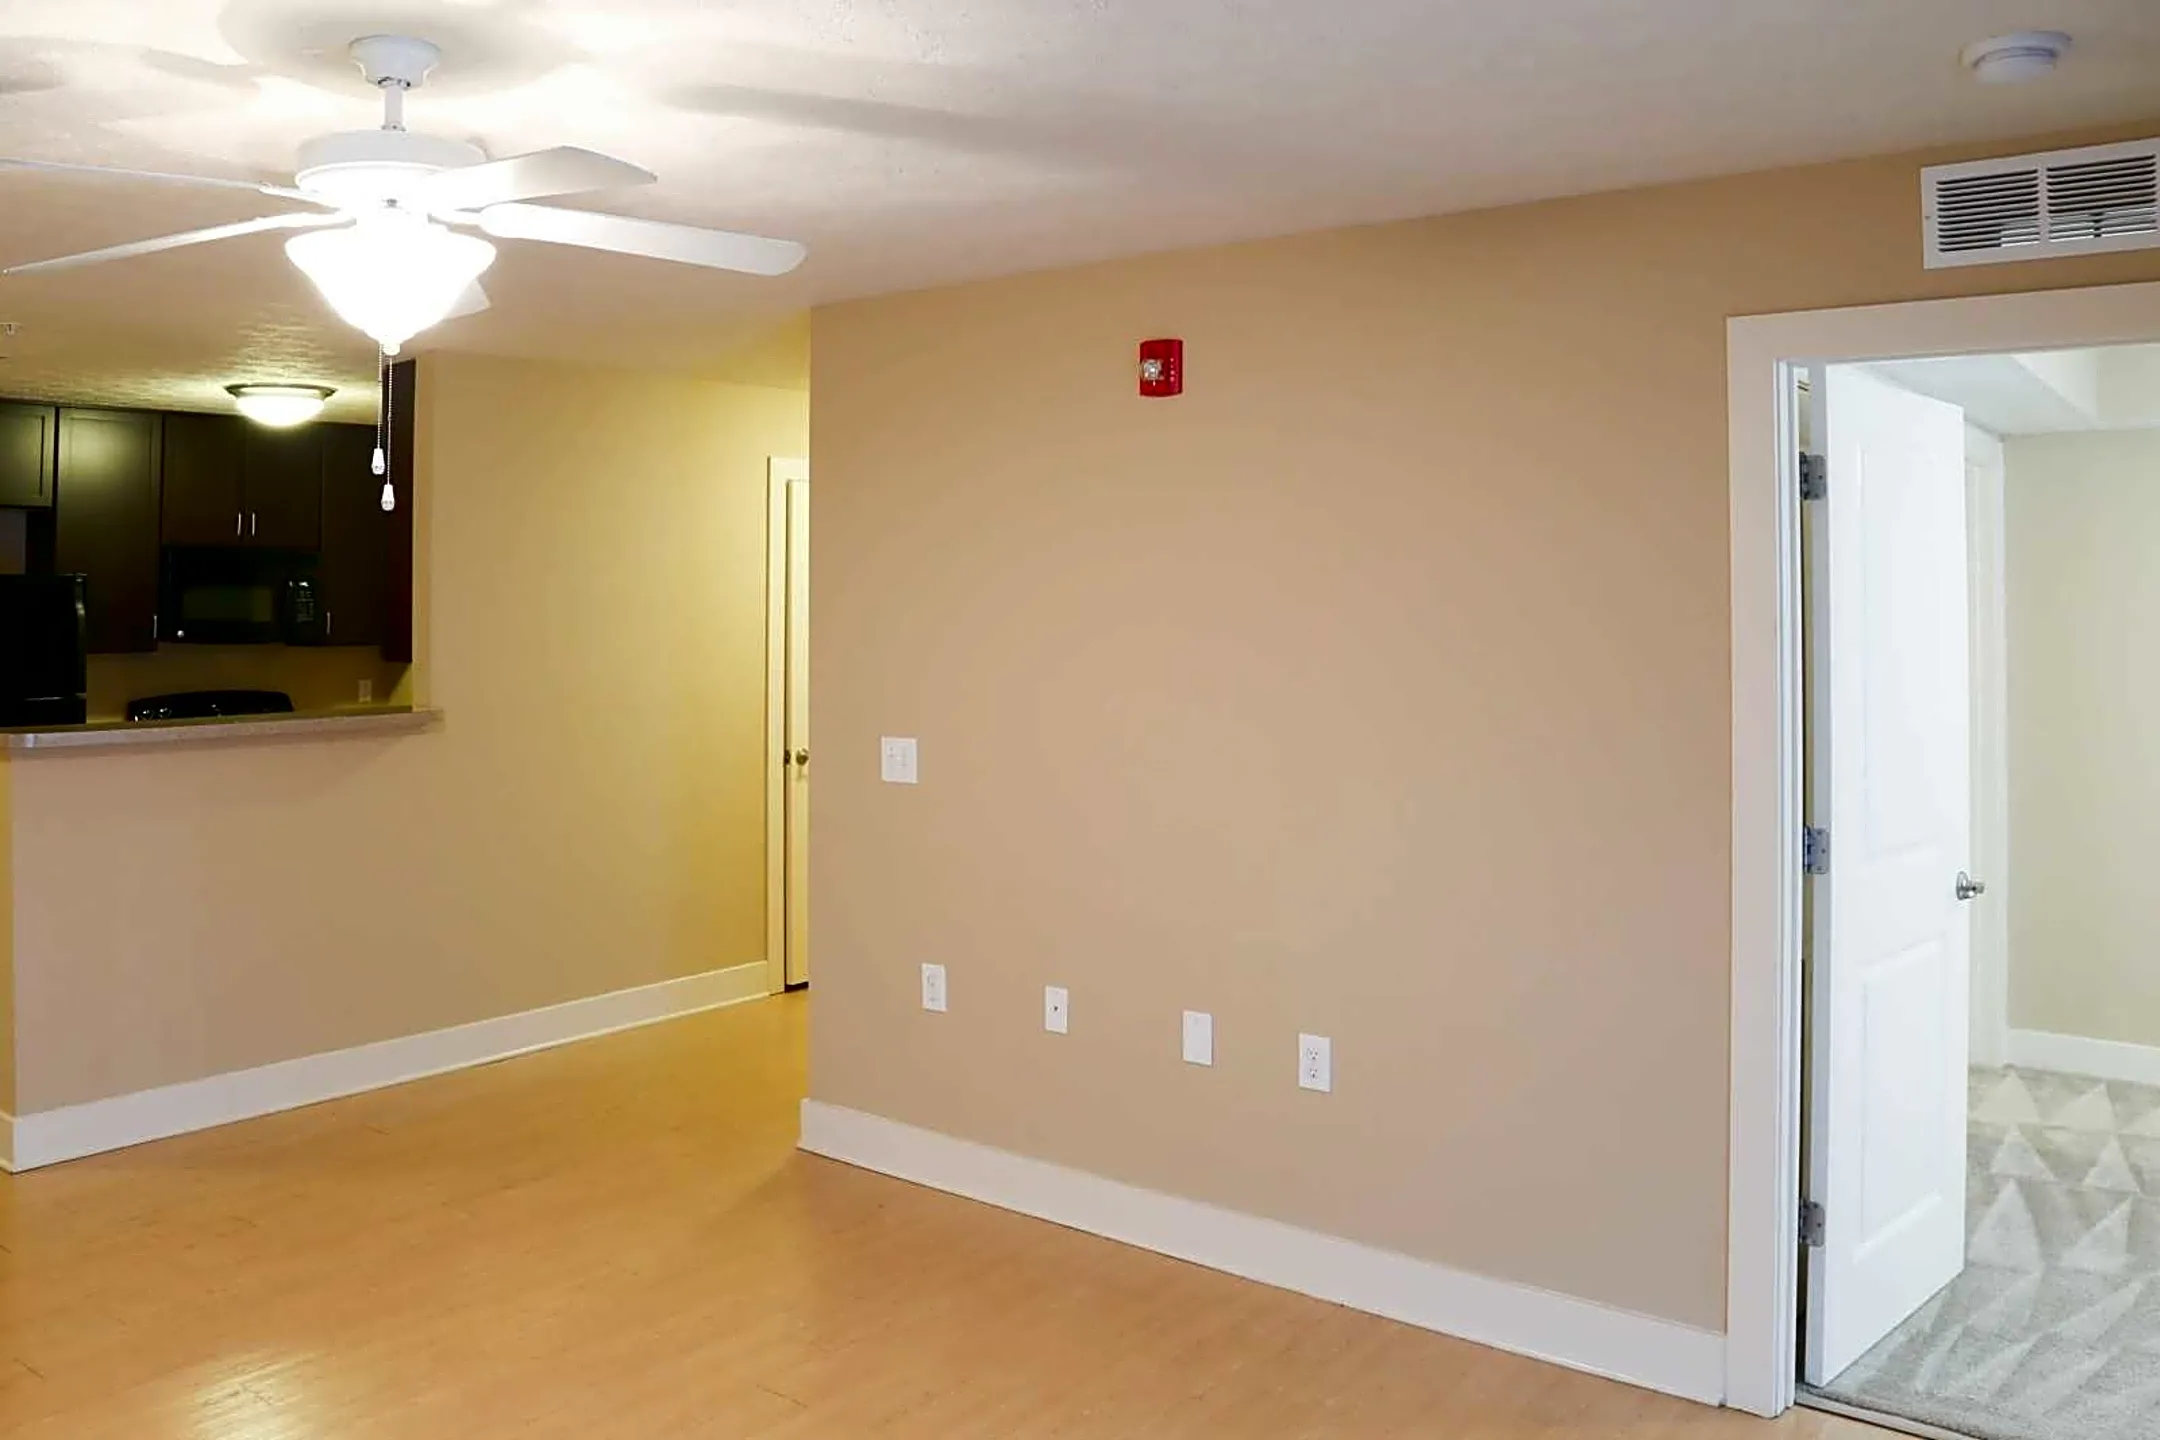 Living Room - Towne Commons Apartments - Elizabethtown, KY